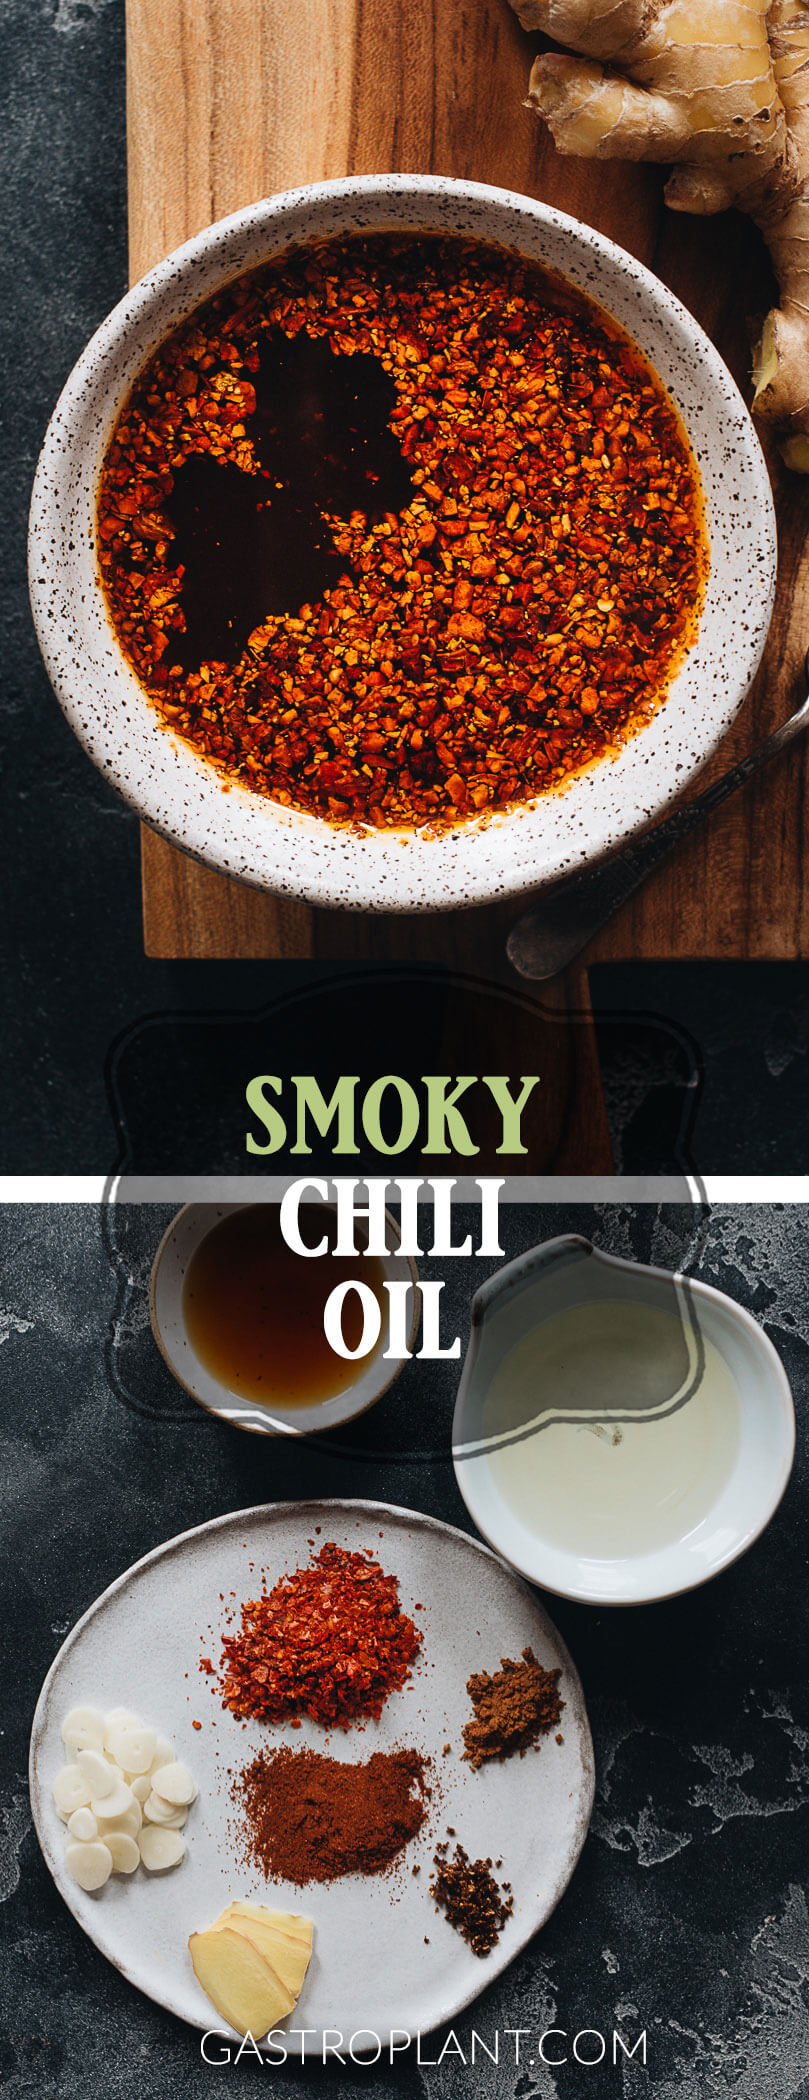 Smoky Hot Japanese Chinese Mexican Chili Oil Topping Sauce